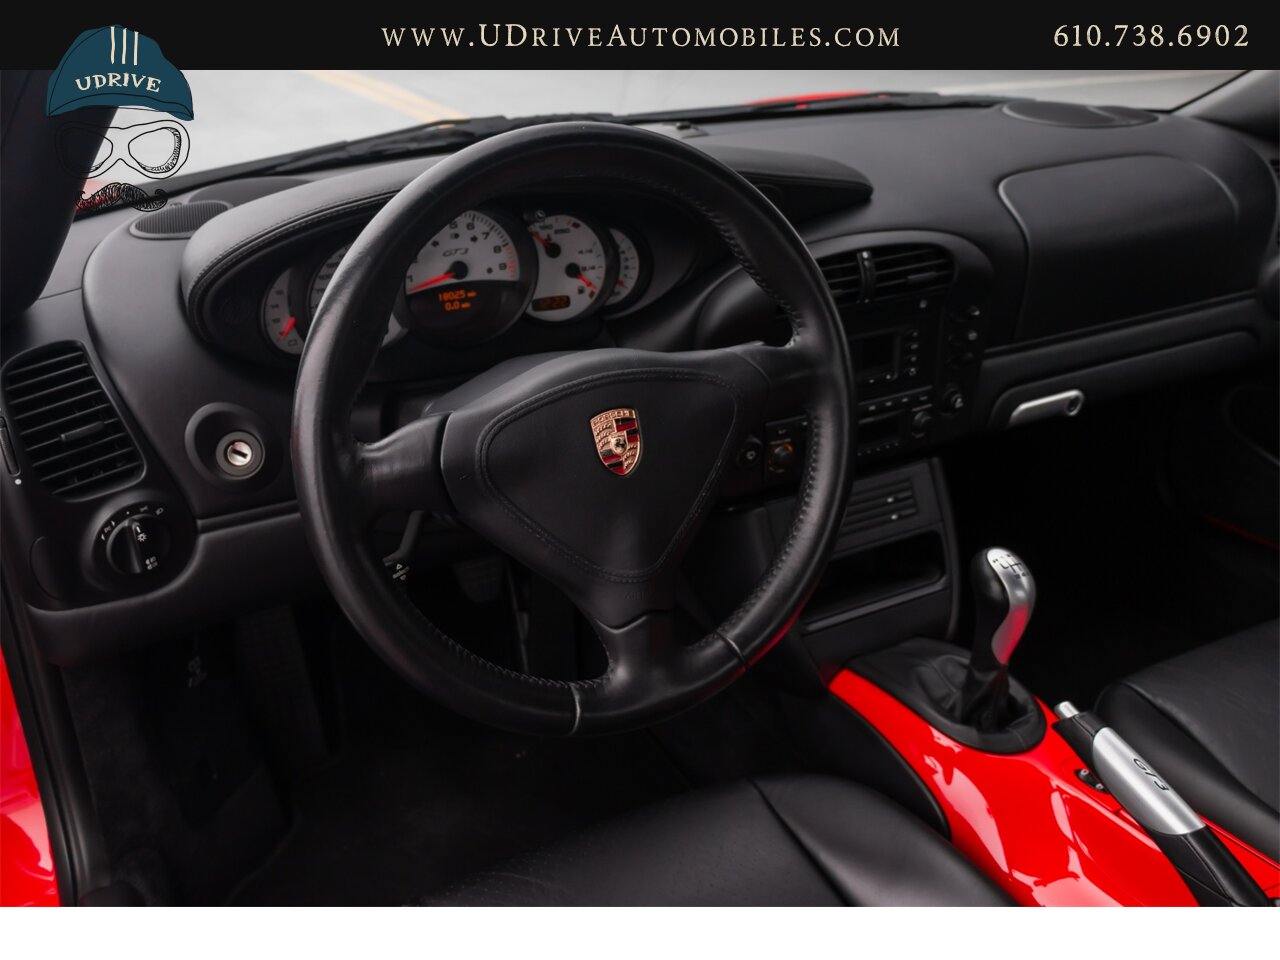 2004 Porsche 911 996 GT3 Guards Red Sport Seats Painted Hardbacks  Painted Center Console 18k Miles - Photo 33 - West Chester, PA 19382